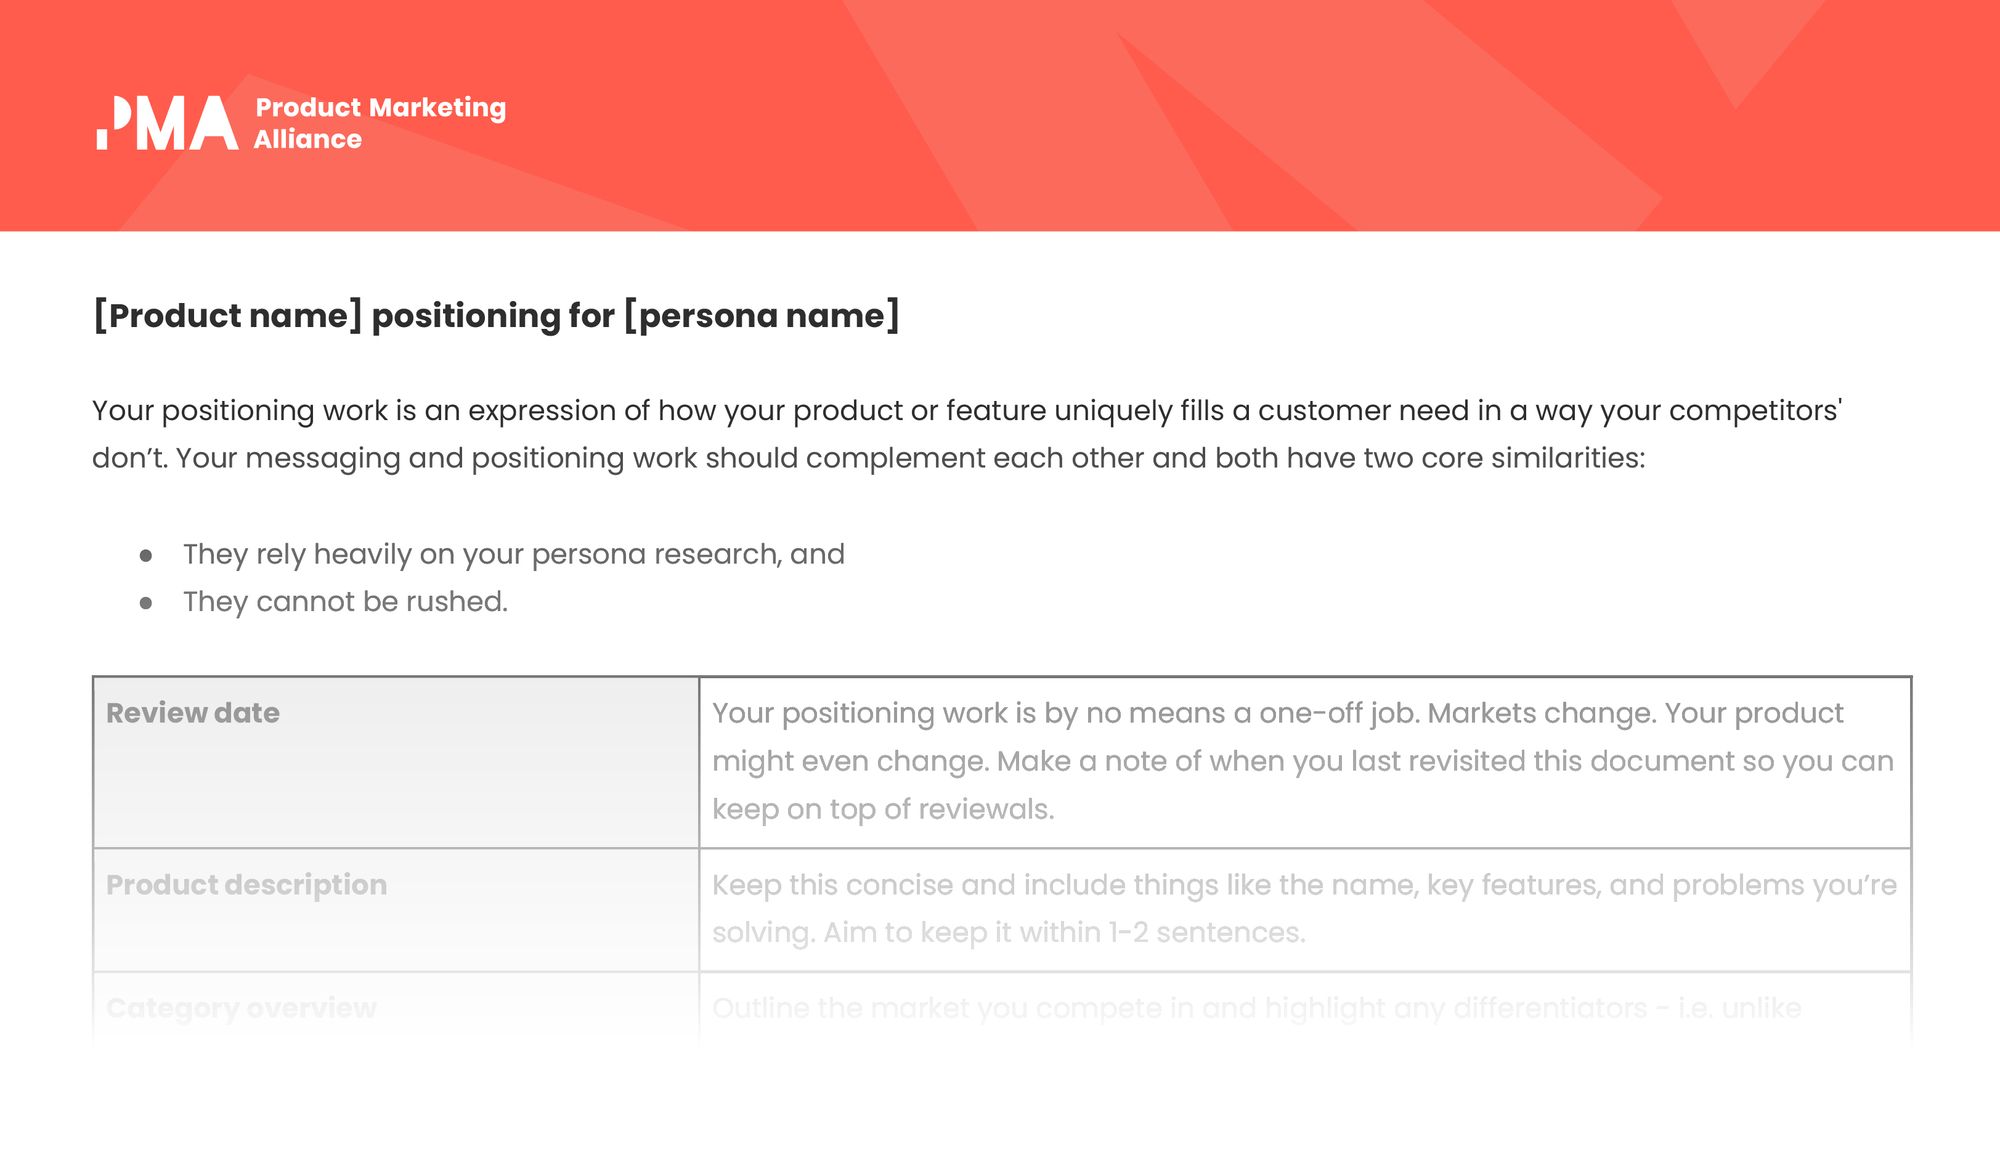 Product positioning template available in the Product Marketing Alliance membership.